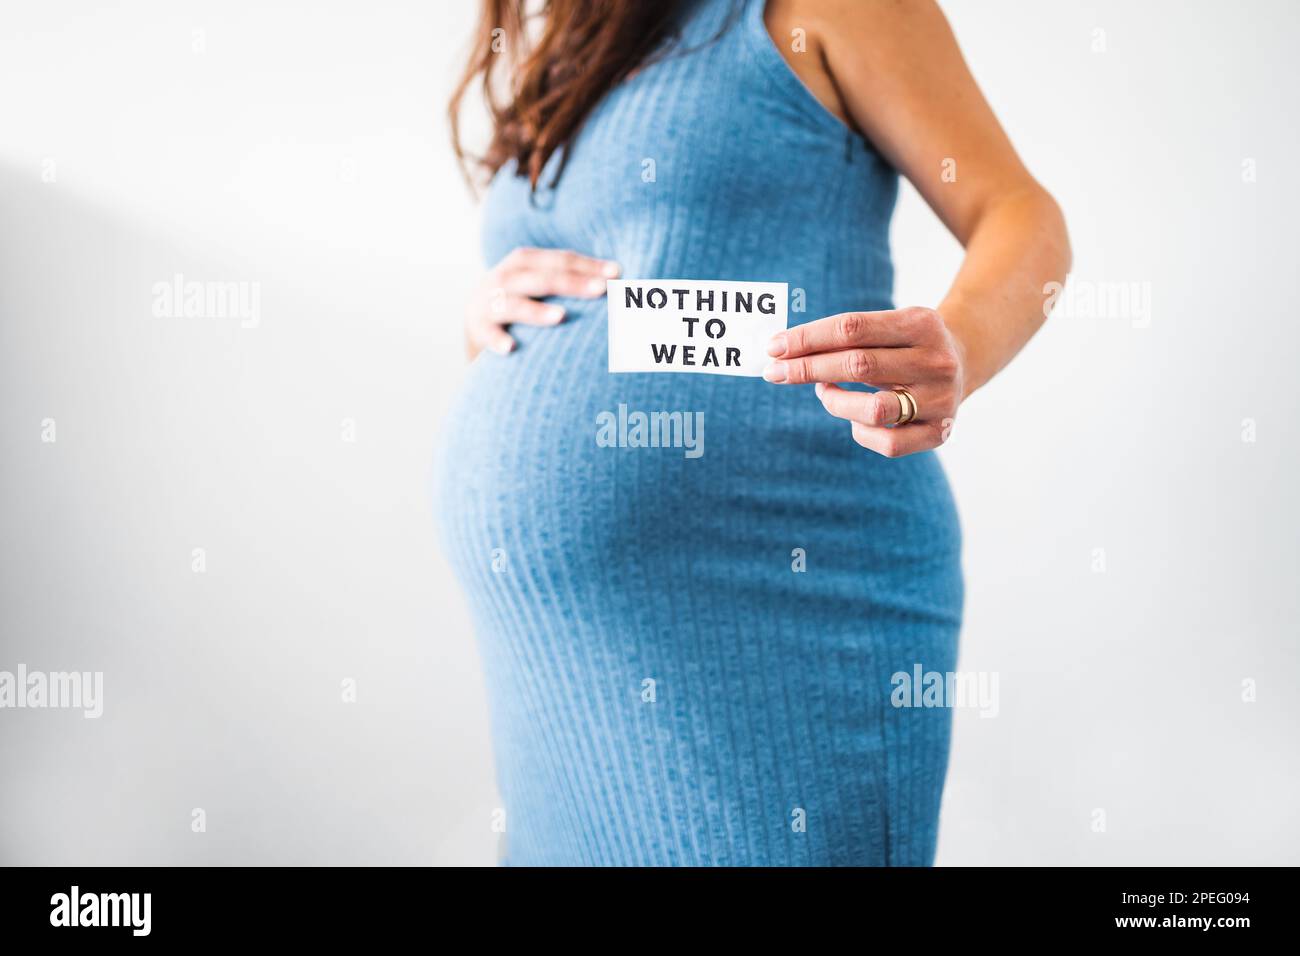 https://c8.alamy.com/comp/2PEG094/nothing-to-wear-sign-held-by-pregnant-woman-in-the-last-month-of-pregnancy-wearing-stretchy-blue-dress-showing-her-bump-maternity-wear-and-inclusive-2PEG094.jpg